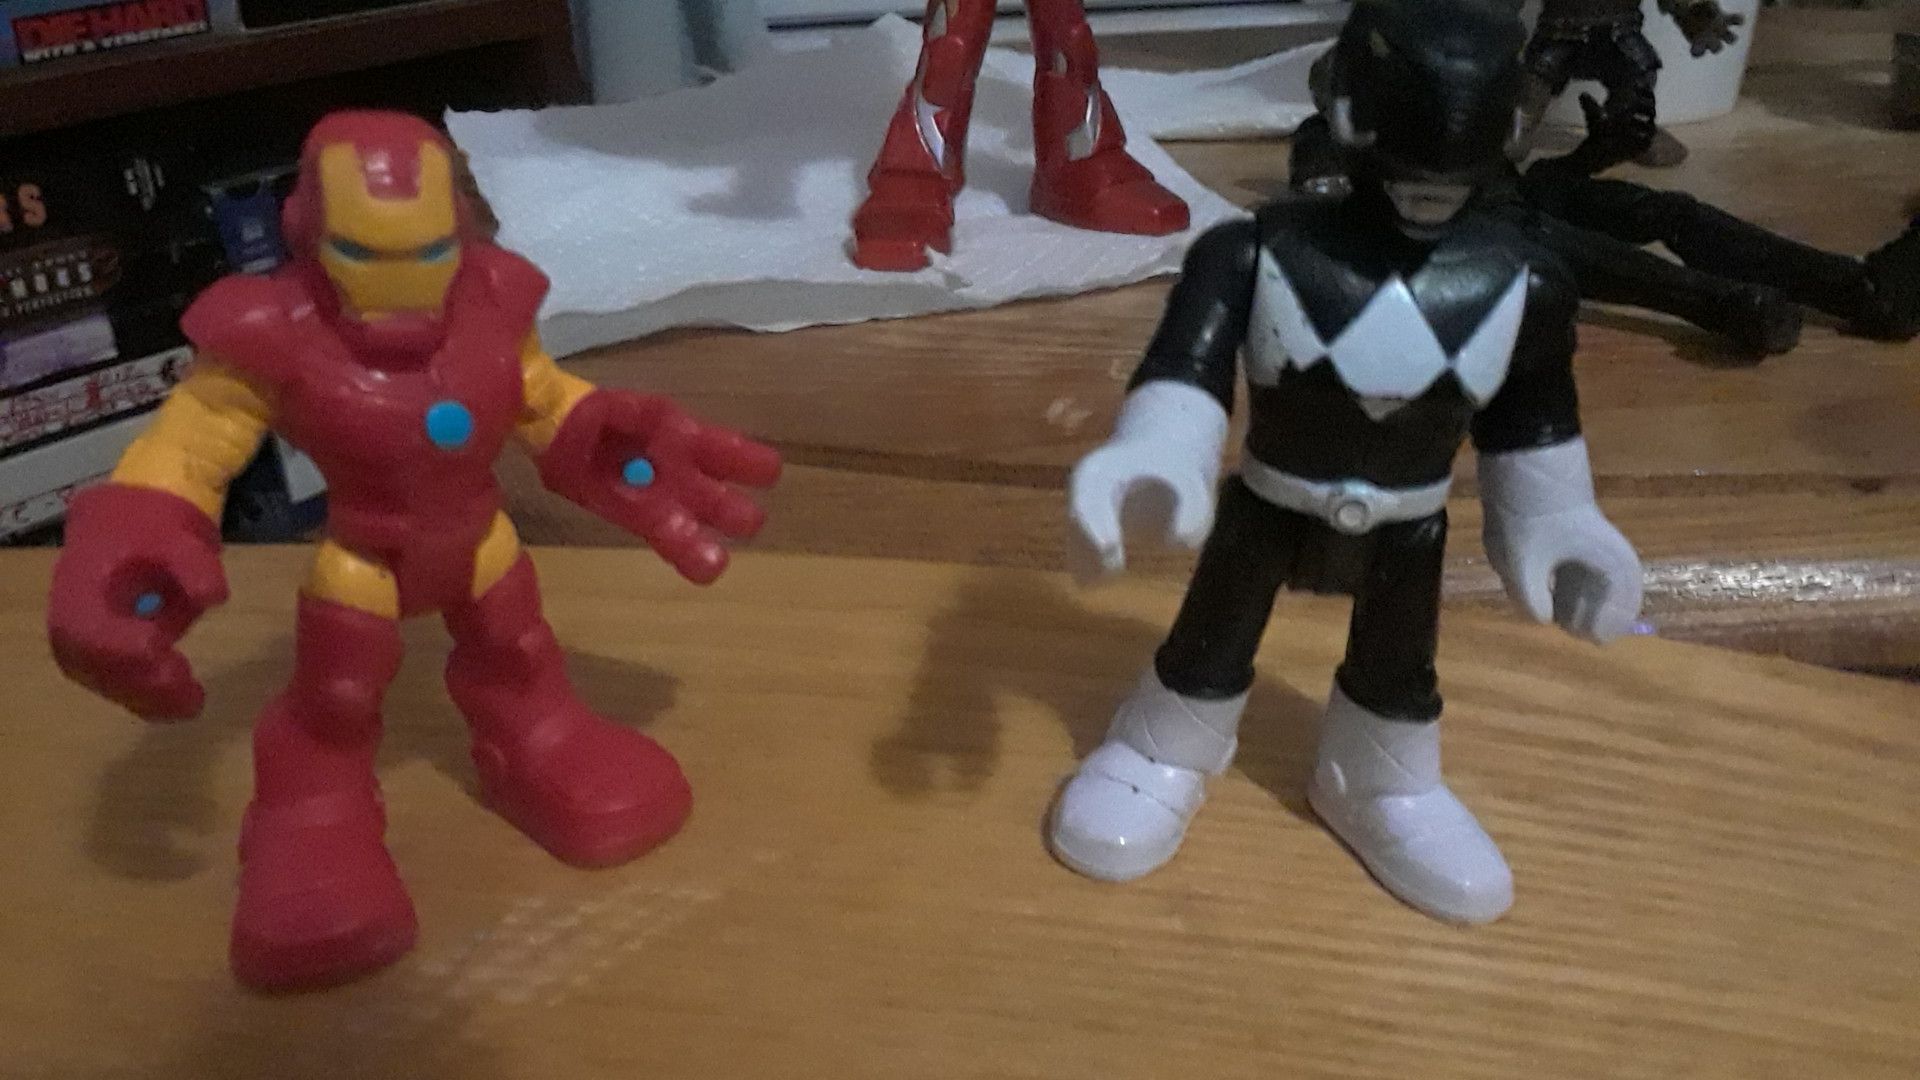 2pc. 3inch. Power ranger and captain america figures.